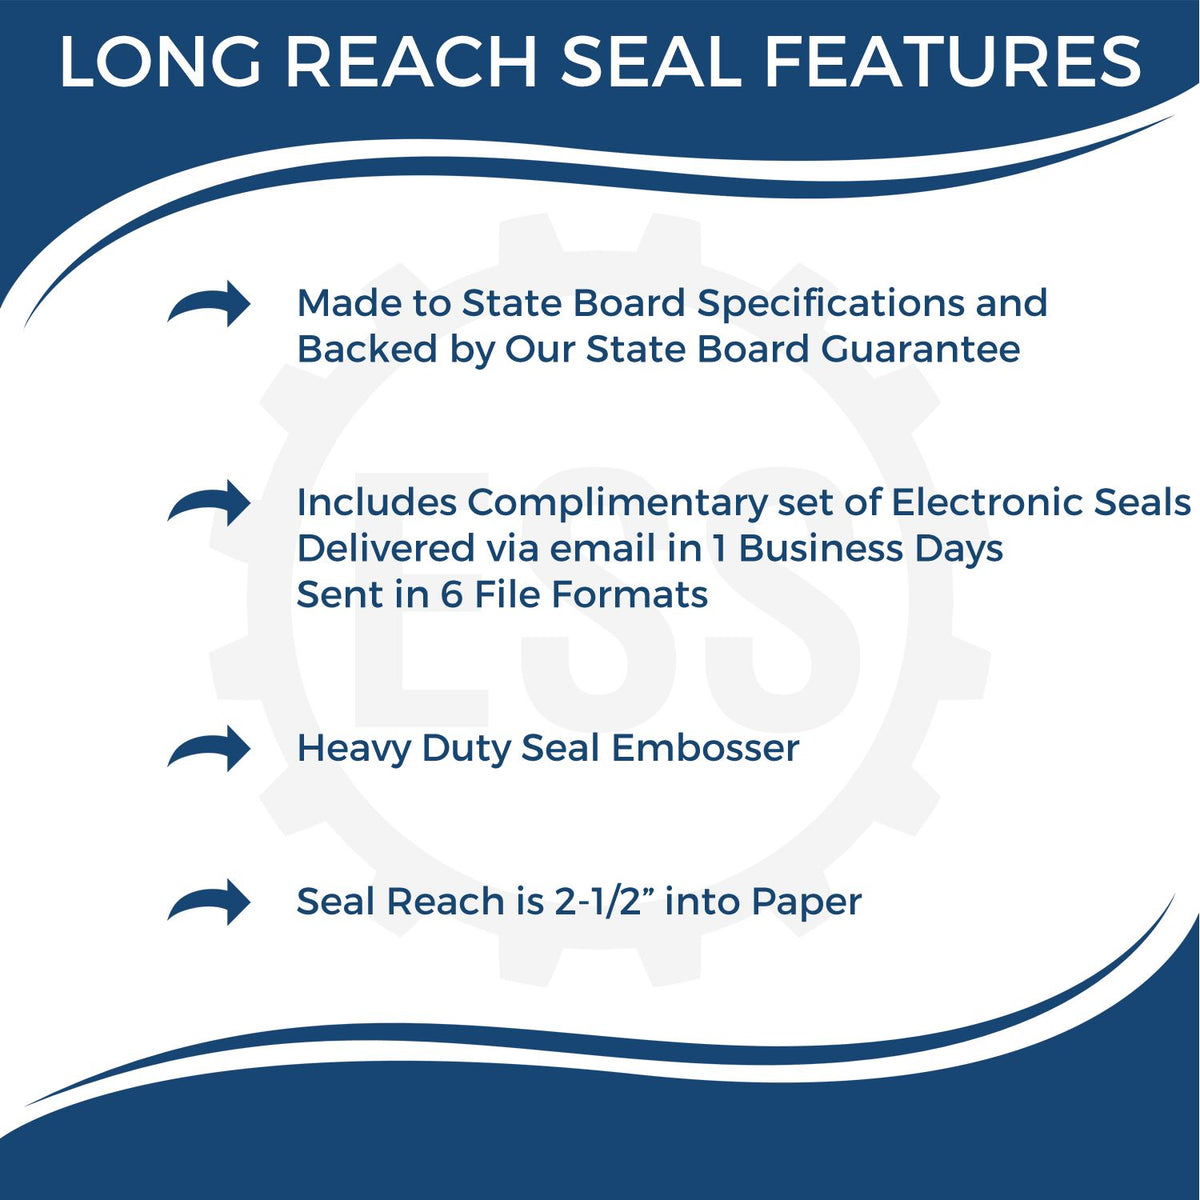 A picture of an infographic highlighting the selling points for the Long Reach Louisiana Land Surveyor Seal